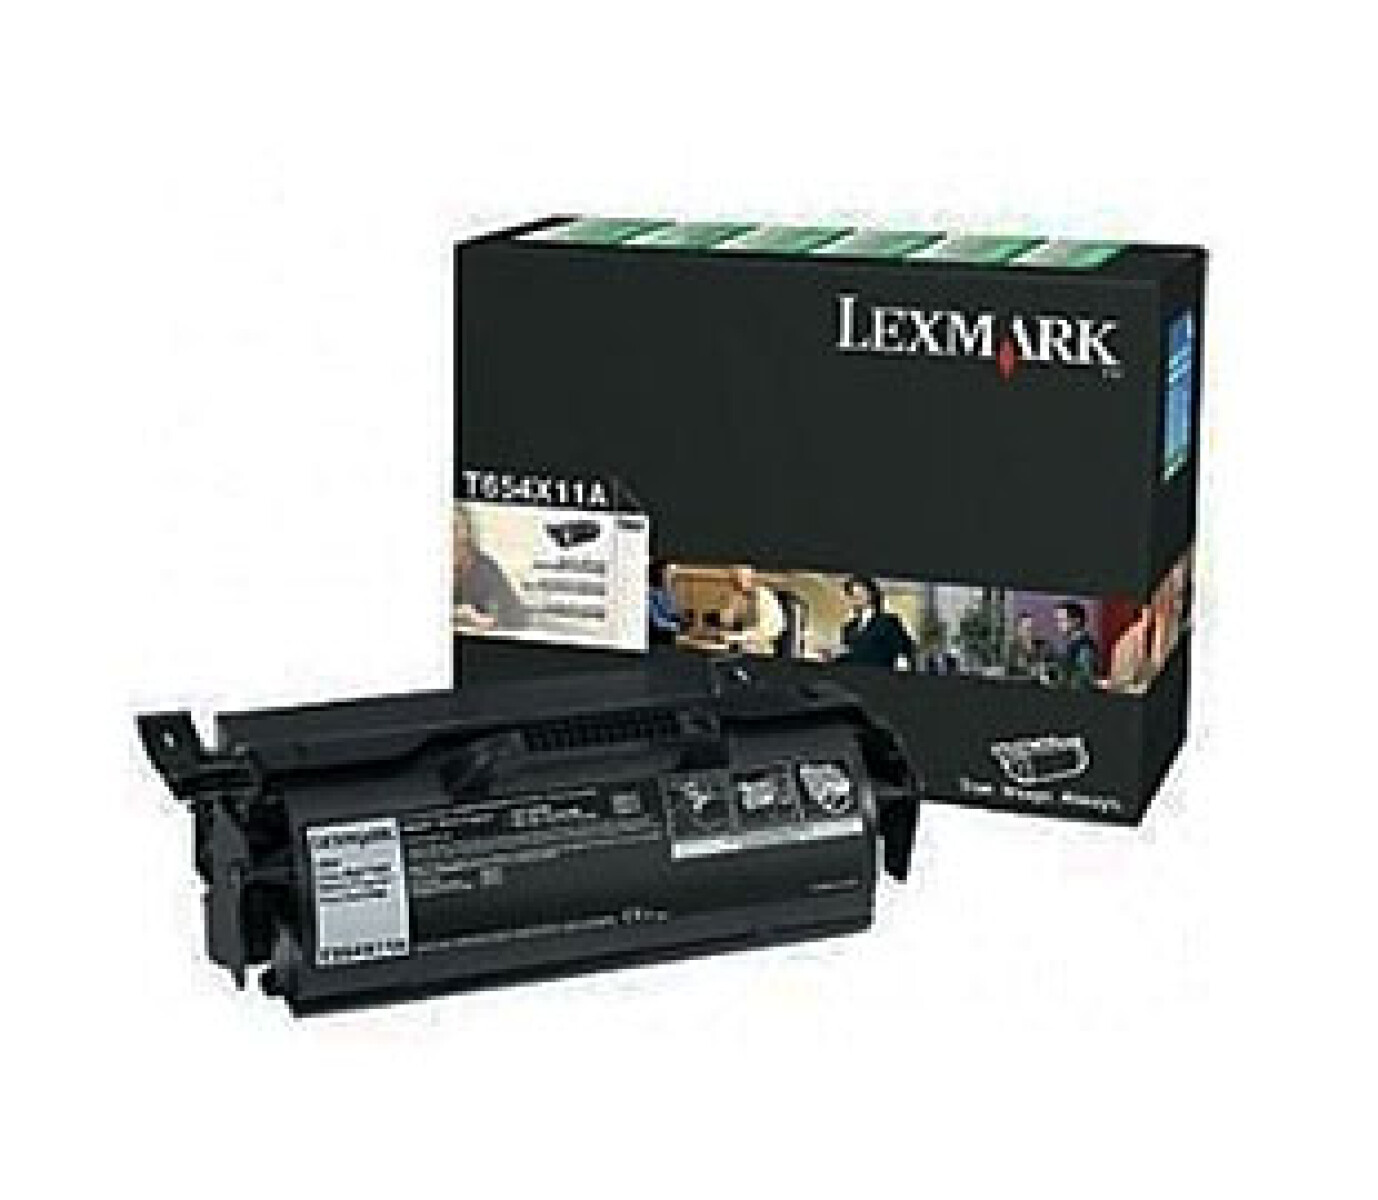 LEXMARK TONER T654X11L EXTRA HIGH YIELD 36000CPS T654 CP - Lexmark Toner T654x11l Extra High Yield 36000cps T654 Cp 